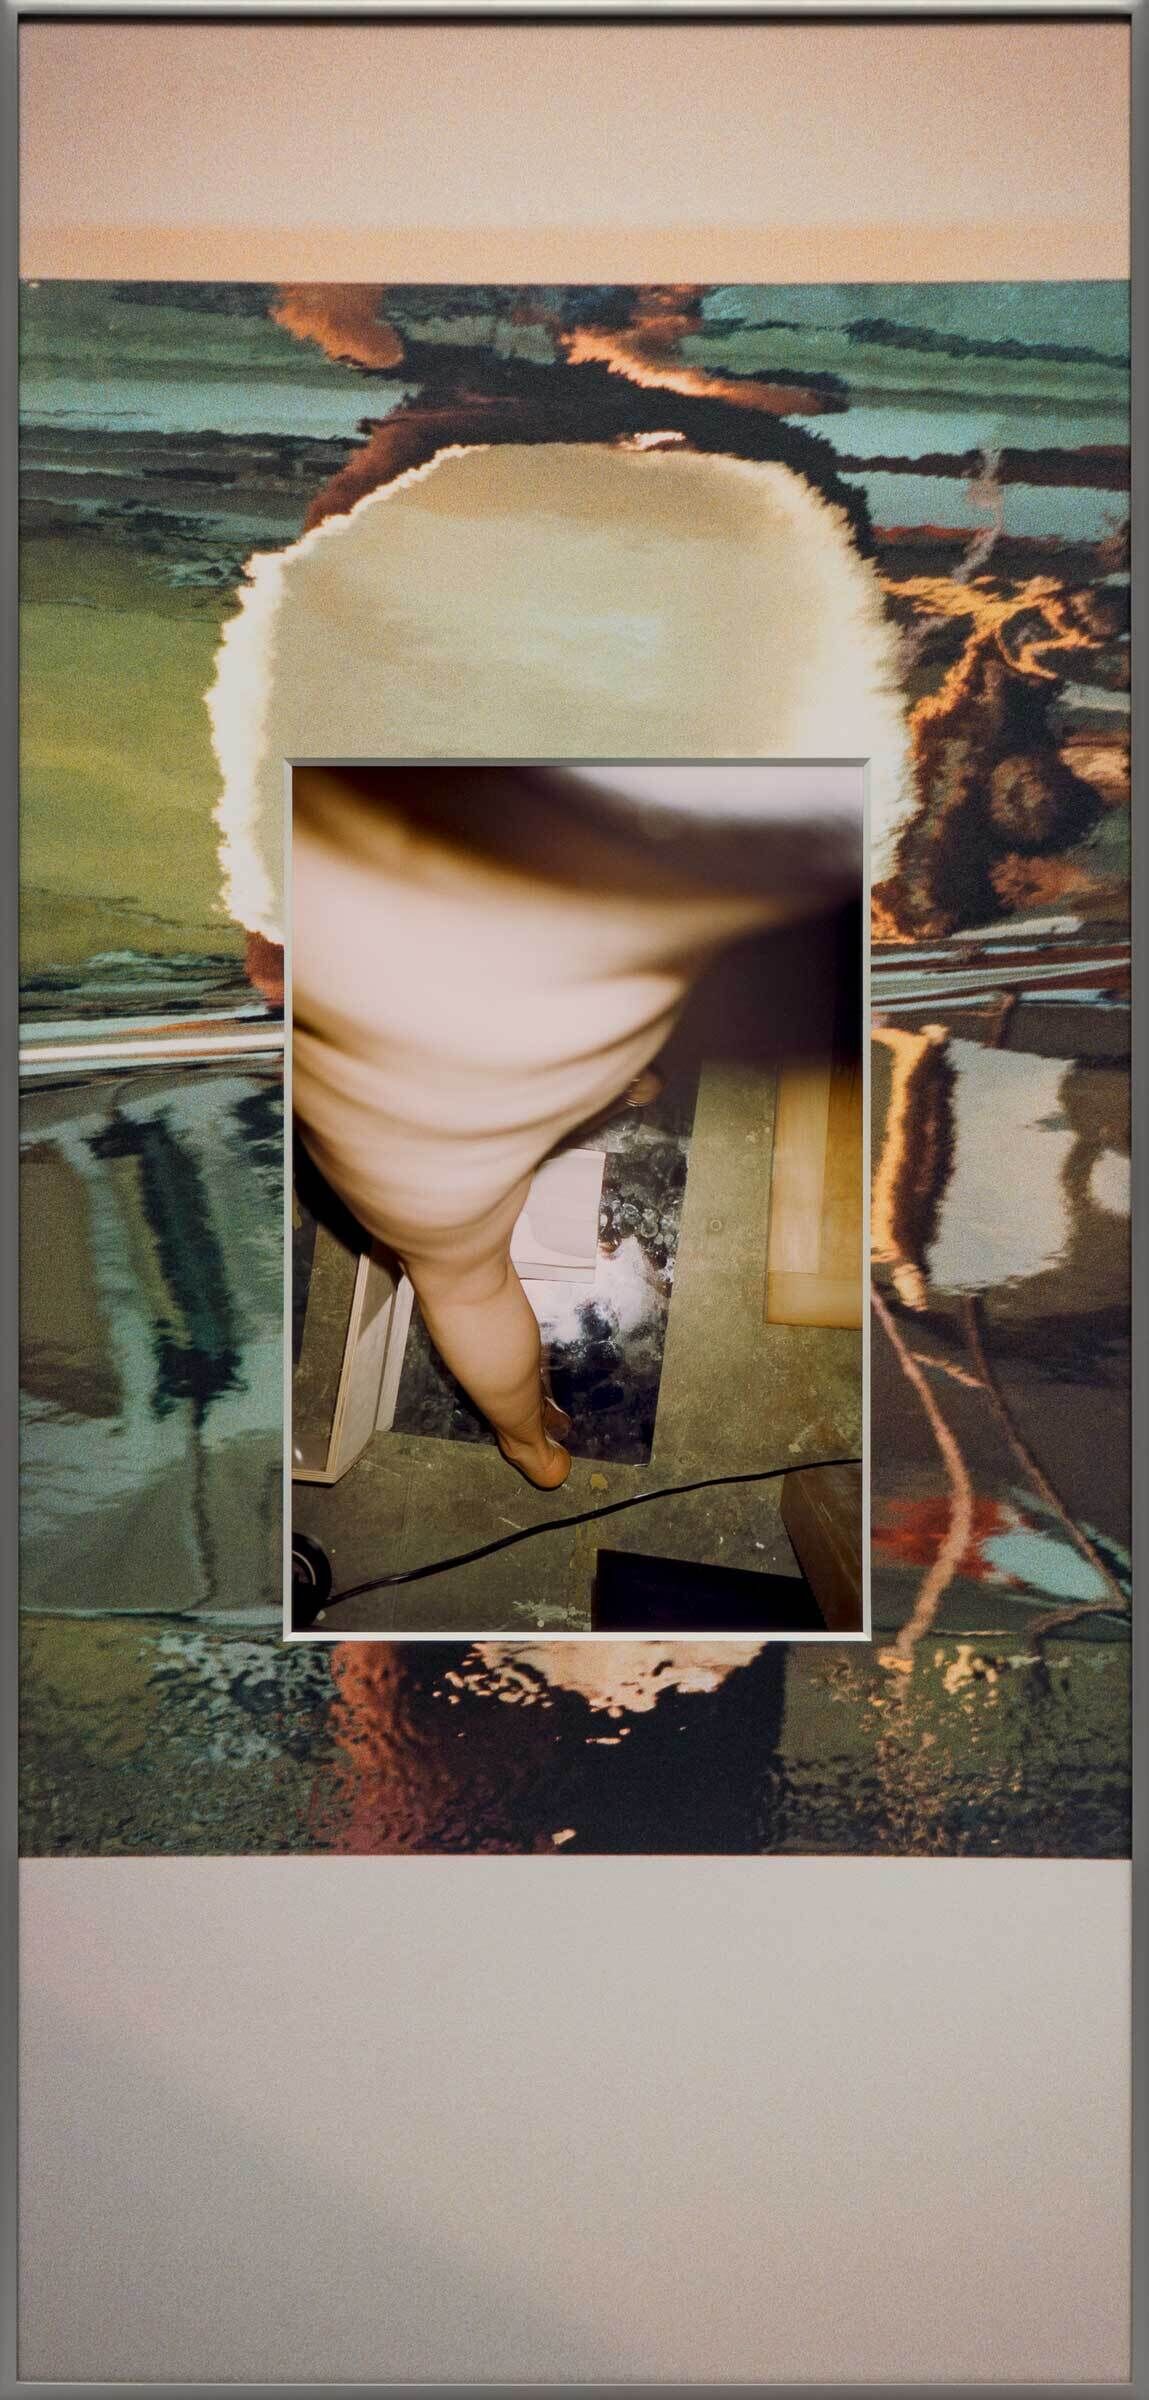 A long vertical photo collage with a blurry image of water and on top an abstract photograph of a leg.